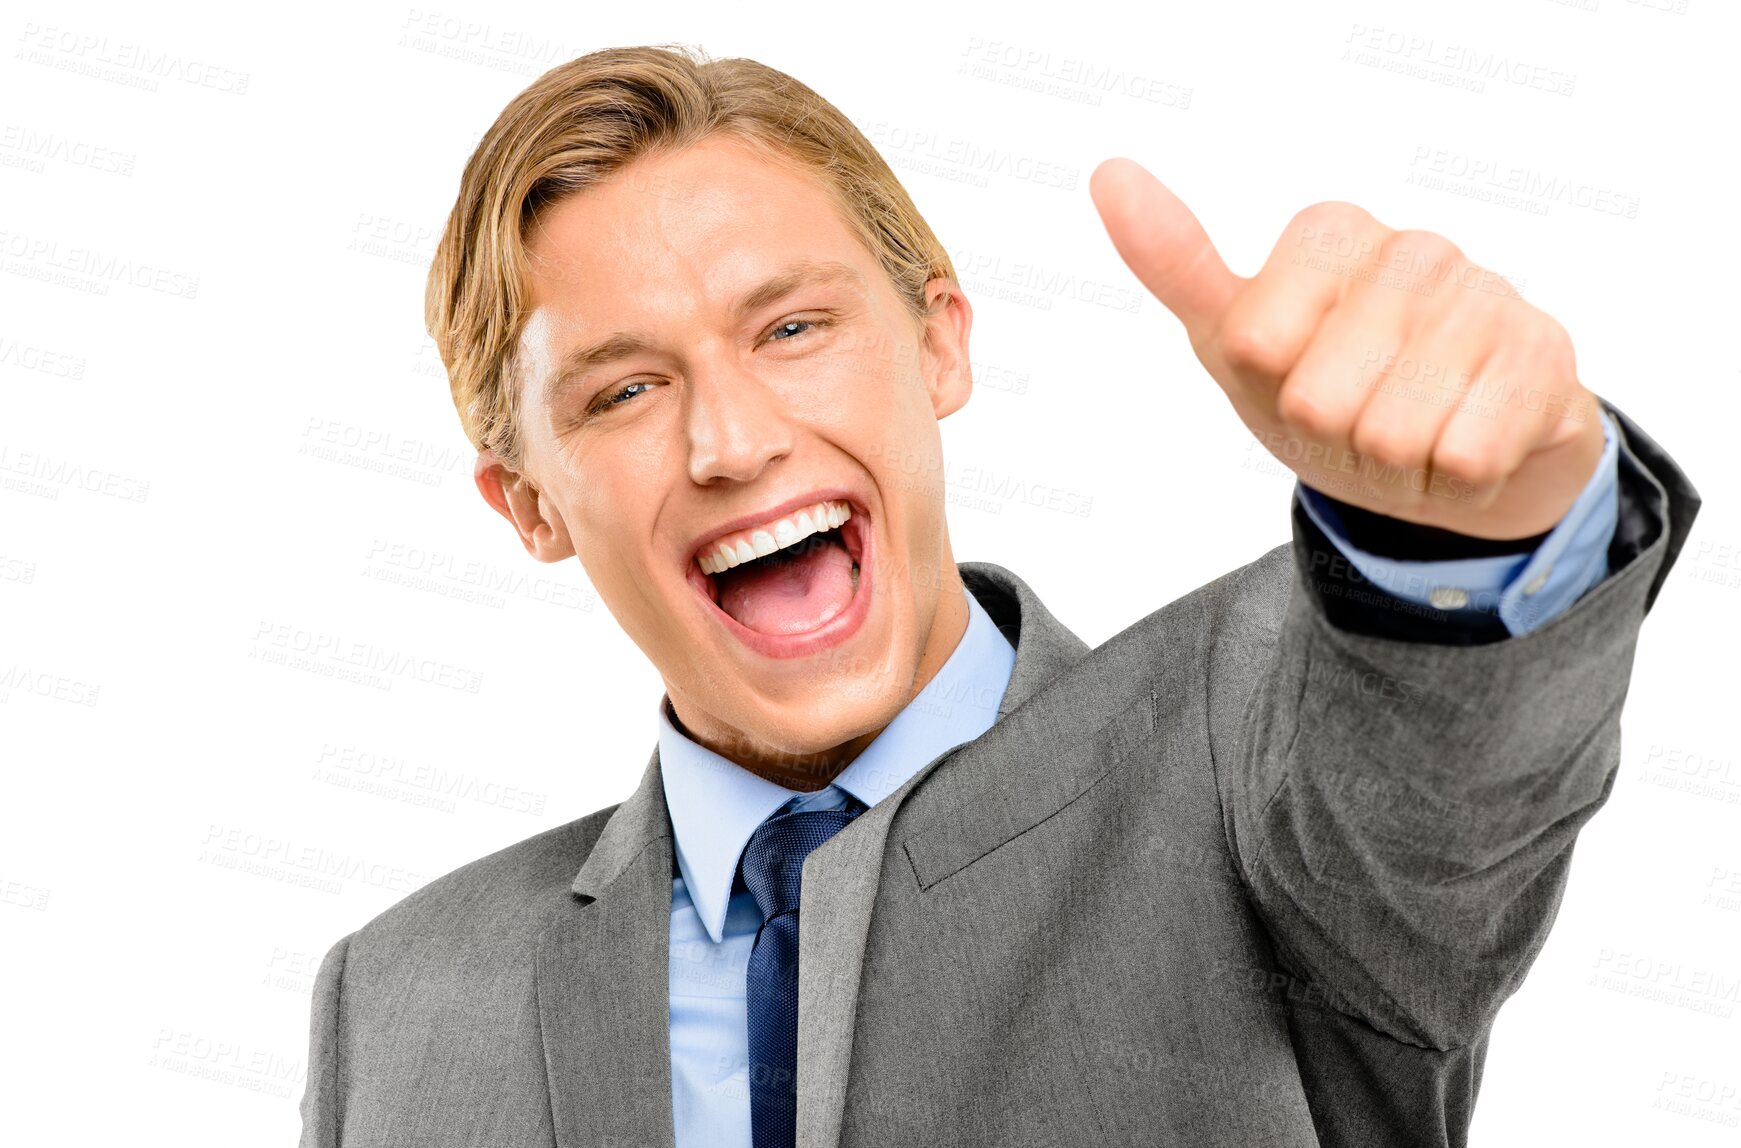 Buy stock photo Happy, thumbs up and portrait of businessman with success, thank you and motivation. Smile, excited and a corporate employee with a like emoji hand for support isolated on transparent png background